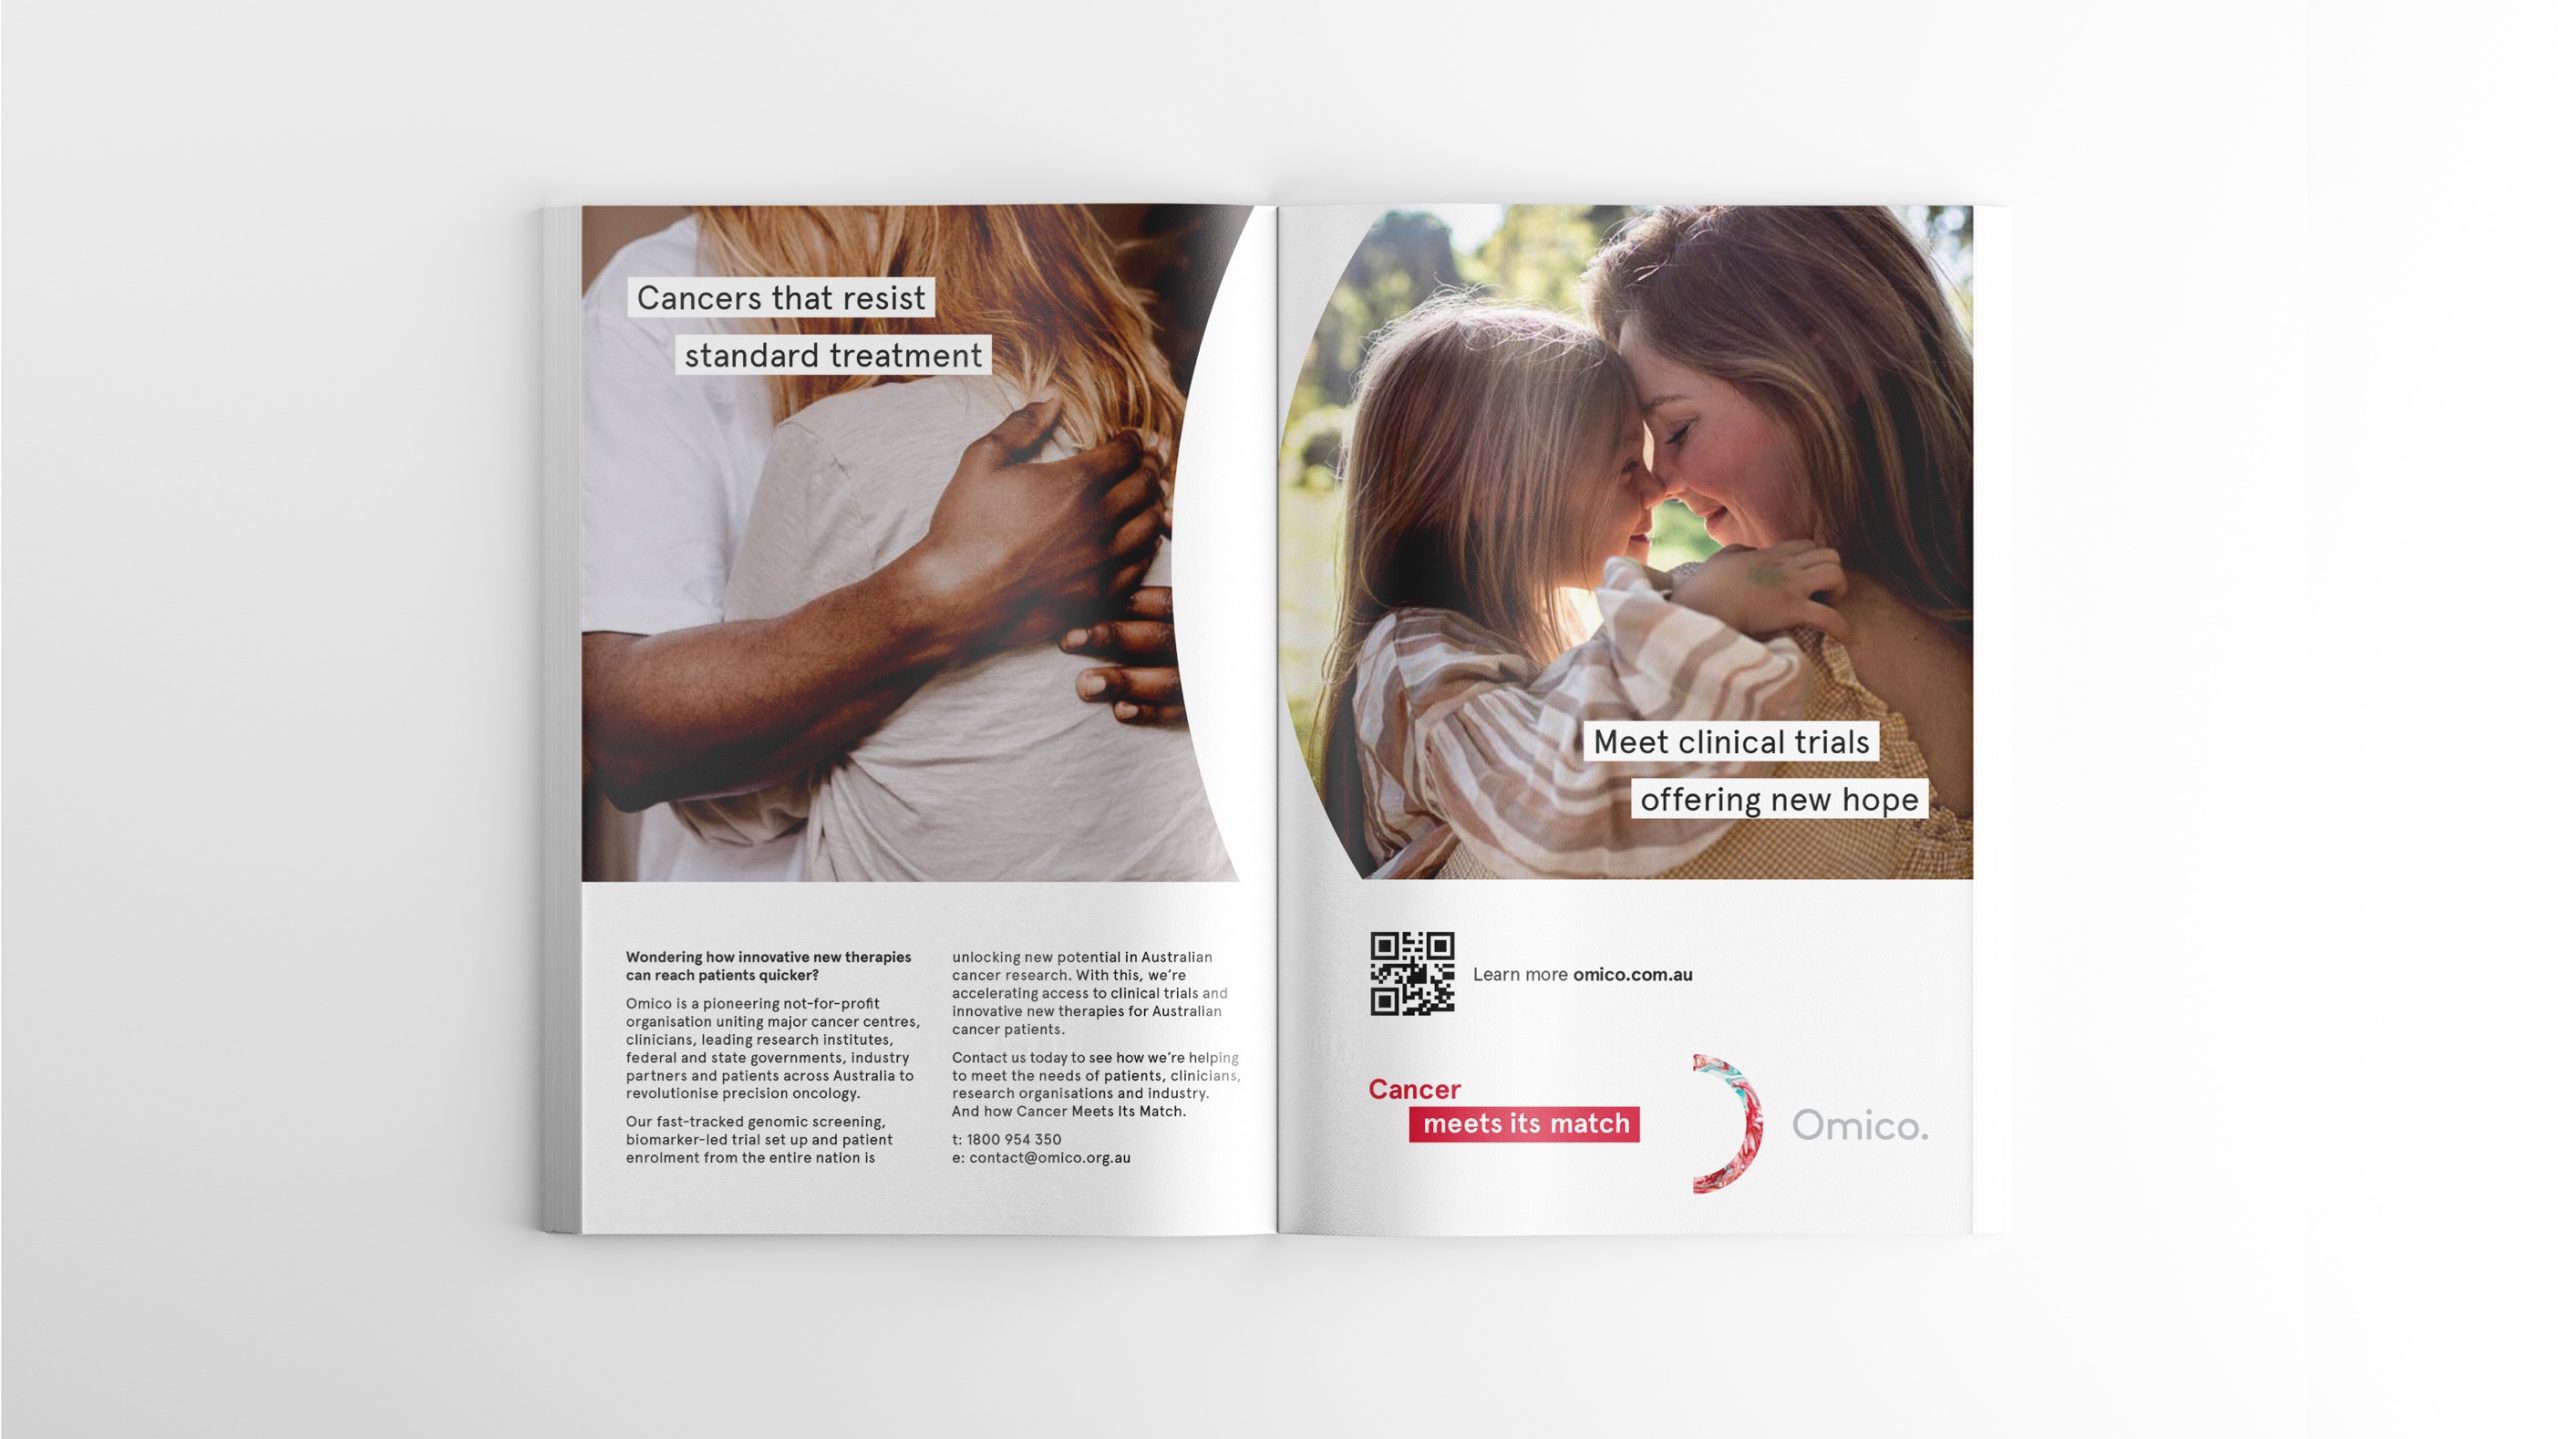 2 pages of a book spread showing cancer treatment information